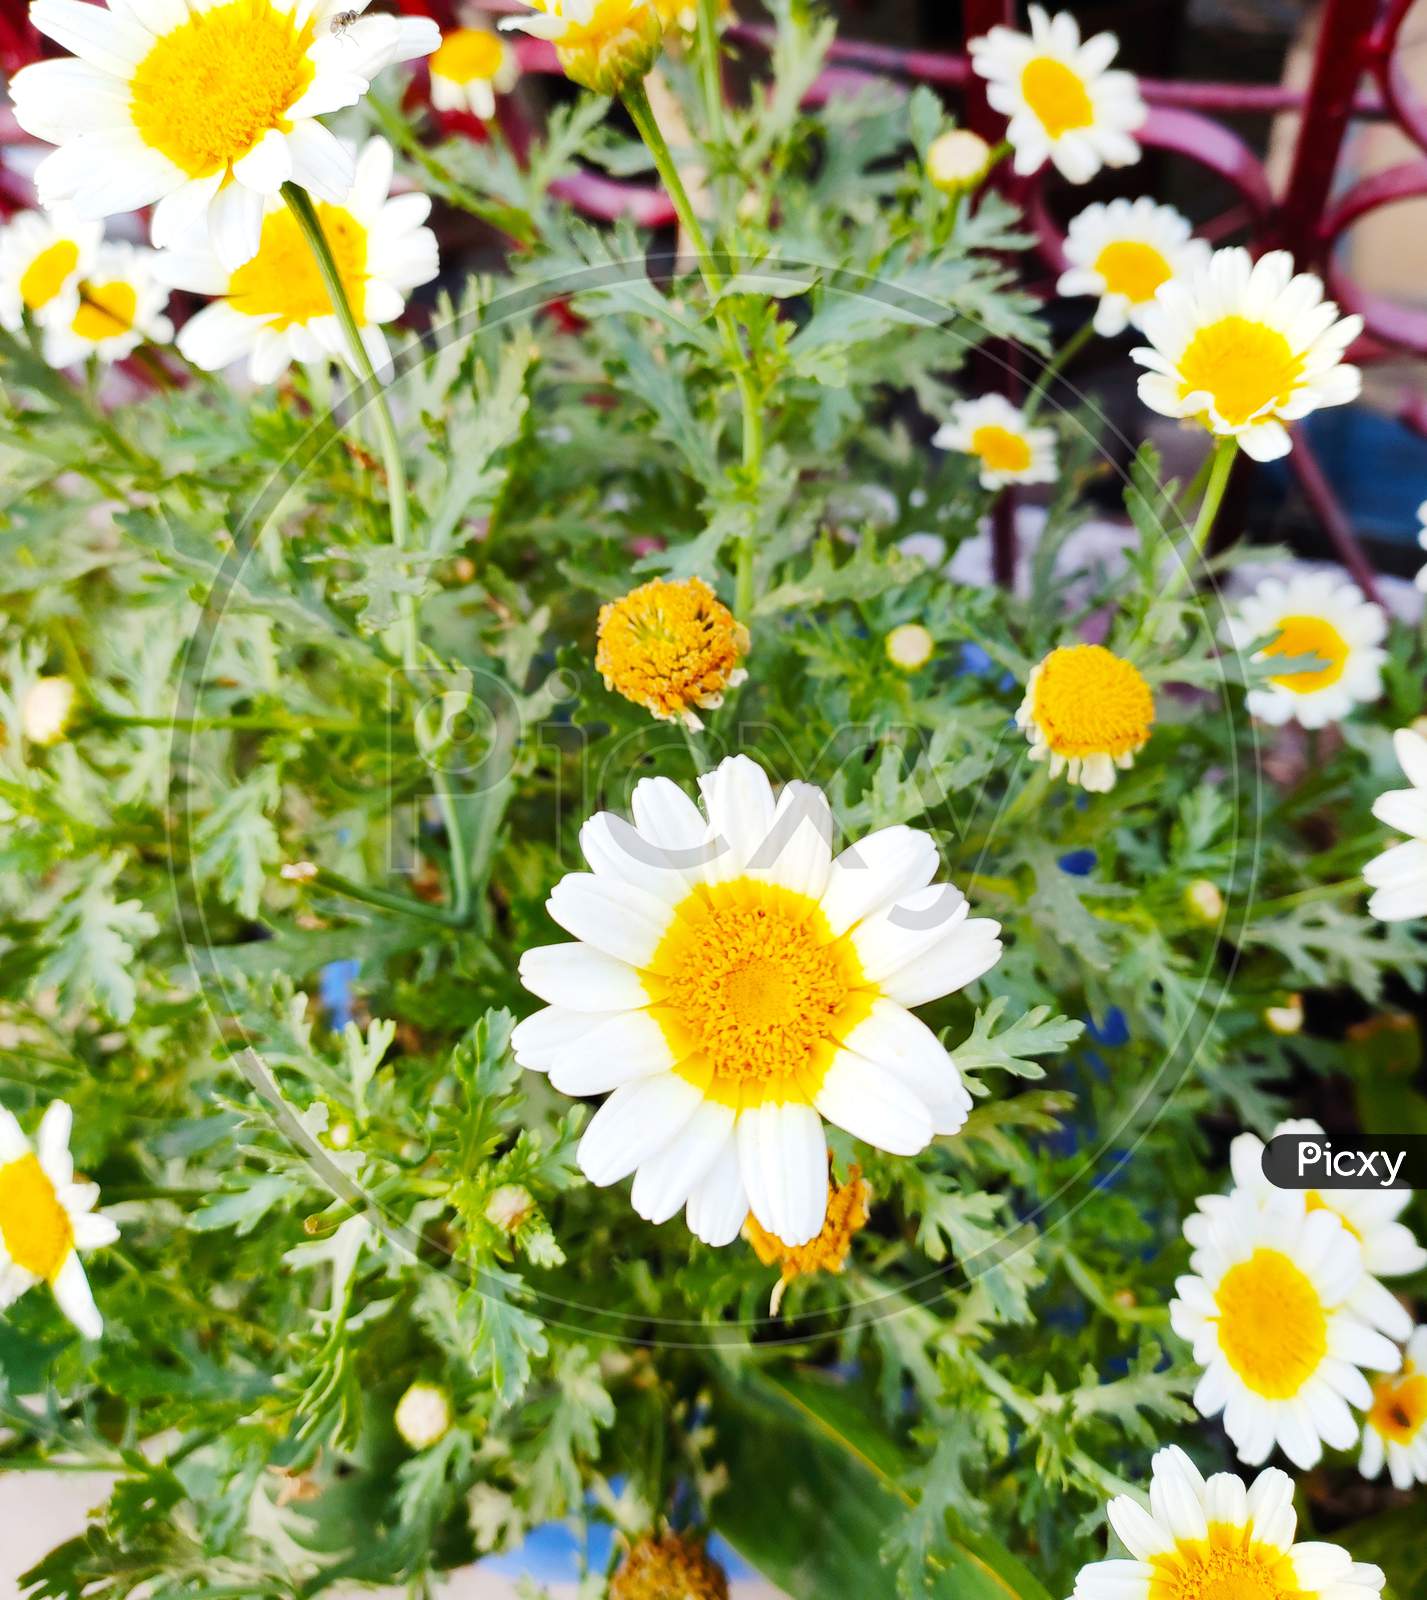 Daisy flowers saying good morning have a nice day